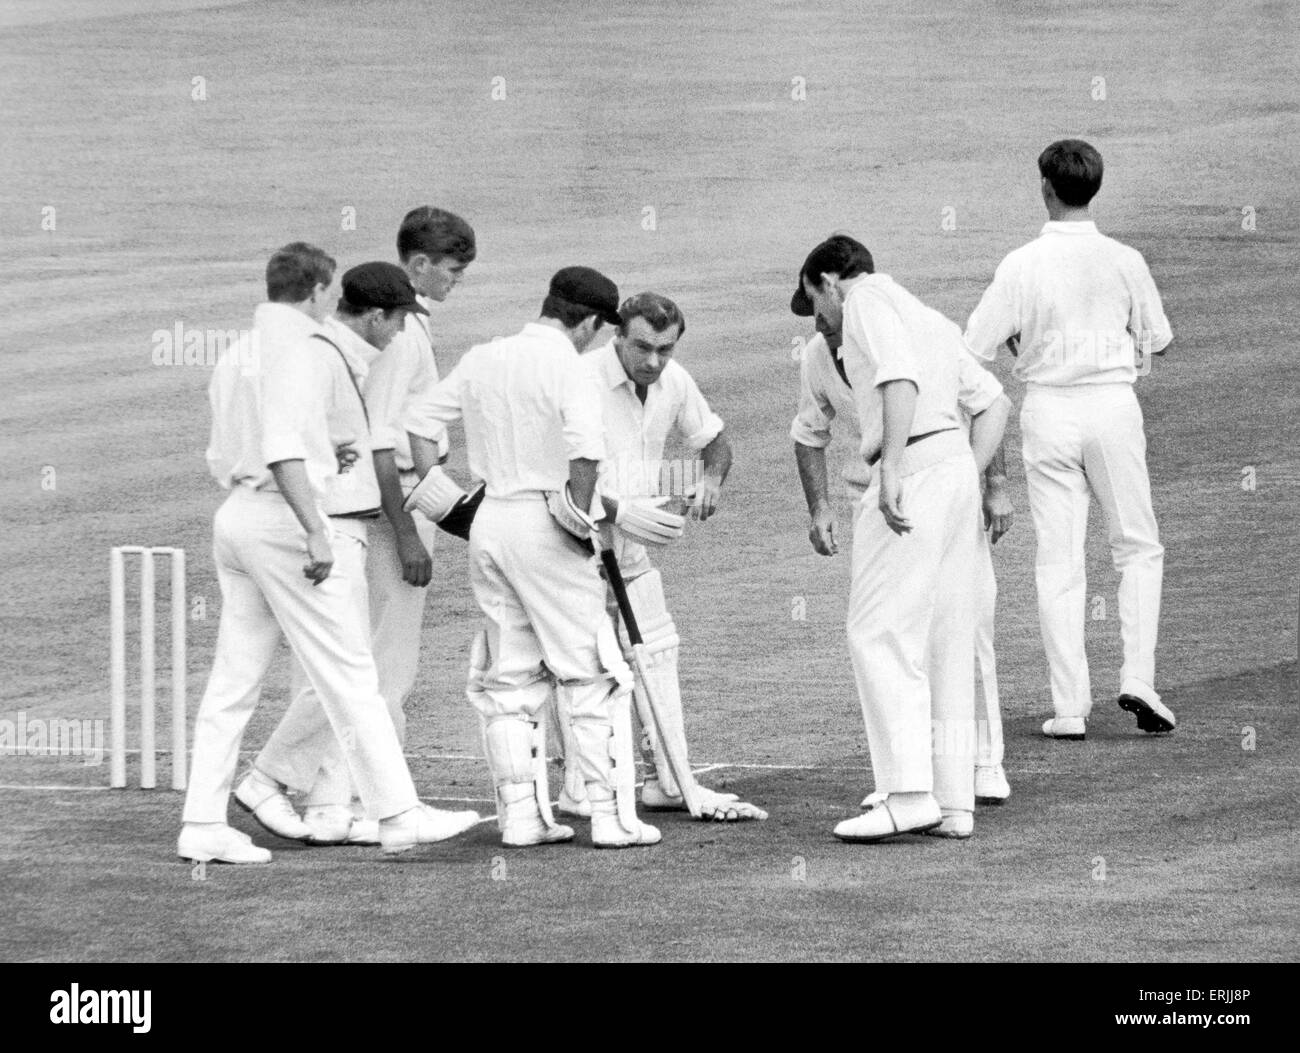 Australian cricket tour of England for the Ashes. England v Australia 3rd Test at Edgbaston. Australian players gather around Edrich after he head been rapped on the hand by Freeman. 12th July 1968. Stock Photo